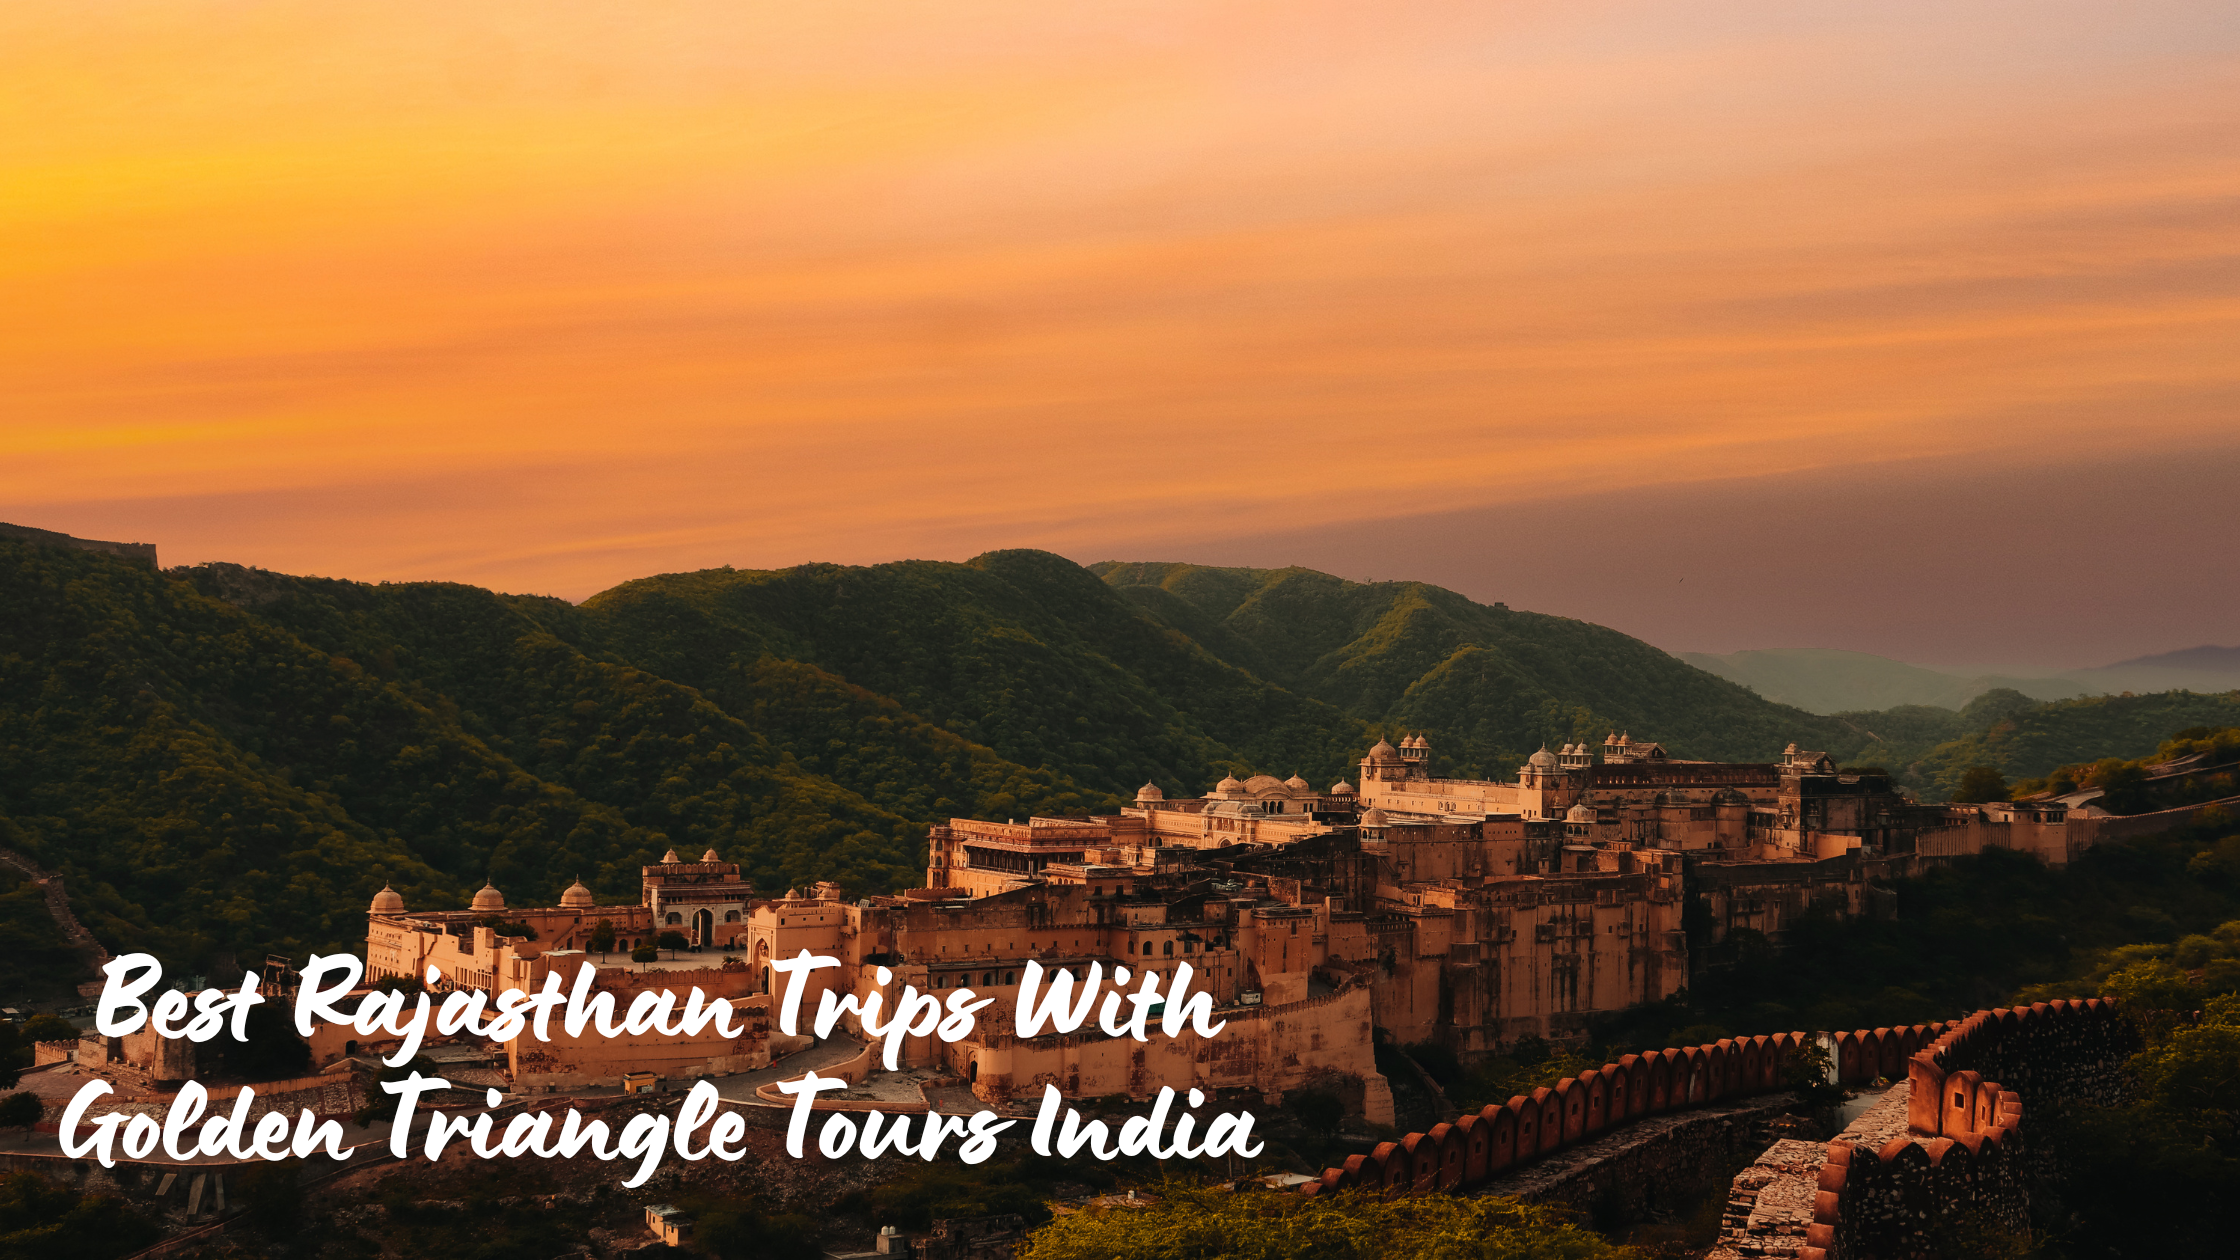 Best Rajasthan Trips With Golden Triangle Tours India